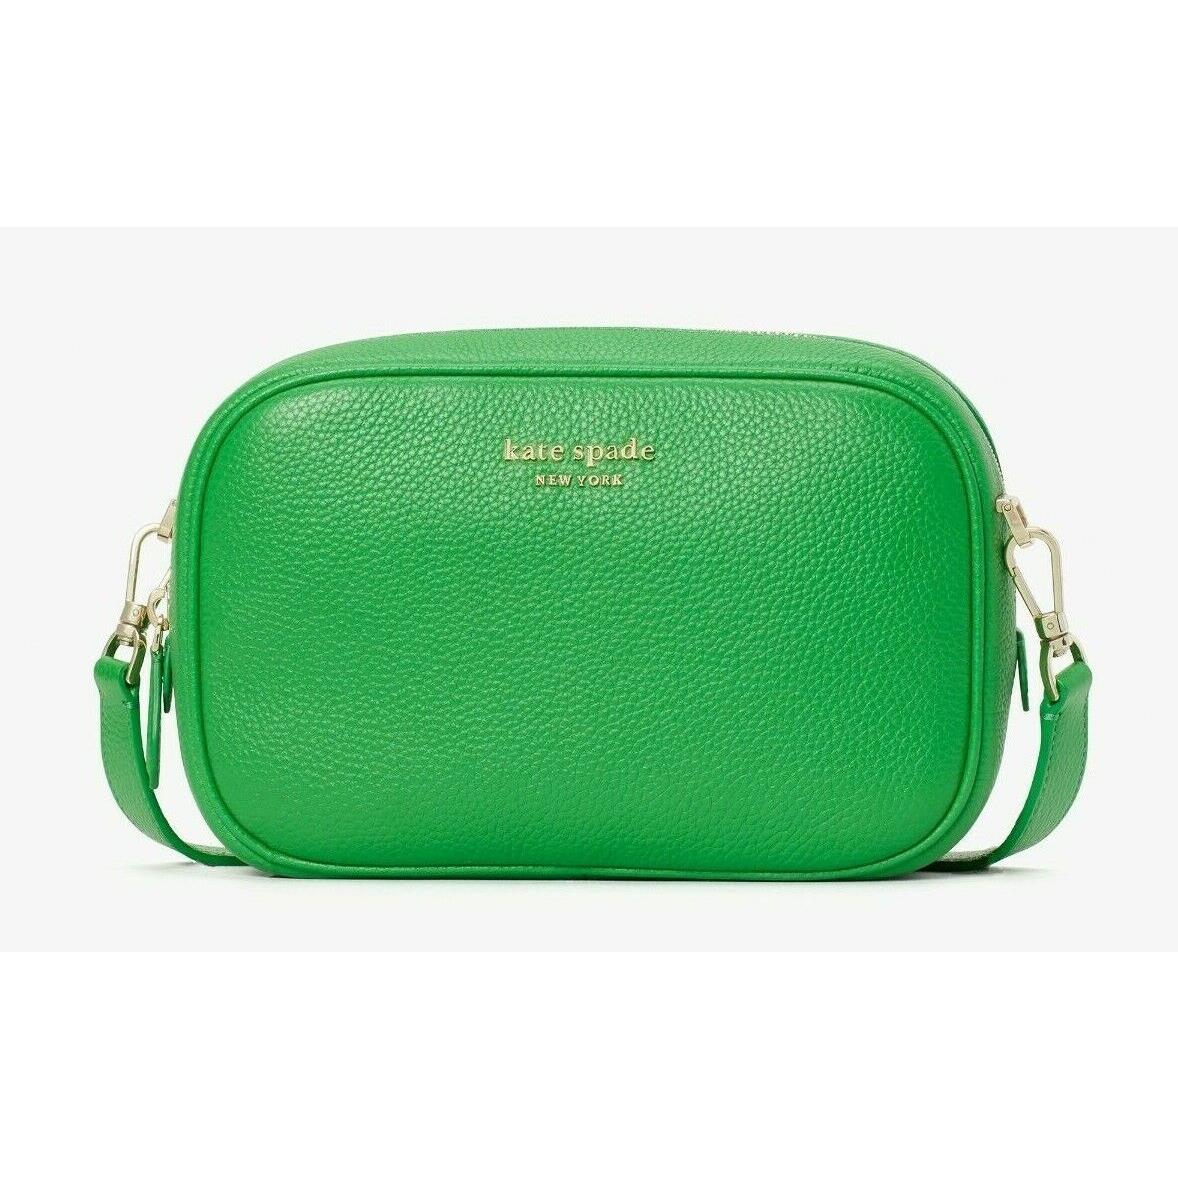 New Kate Spade Astrid Medium Camera Bag Pebble Leather Green Jay with Dust  Bag - Kate Spade bag - 767883098820 | Fash Brands